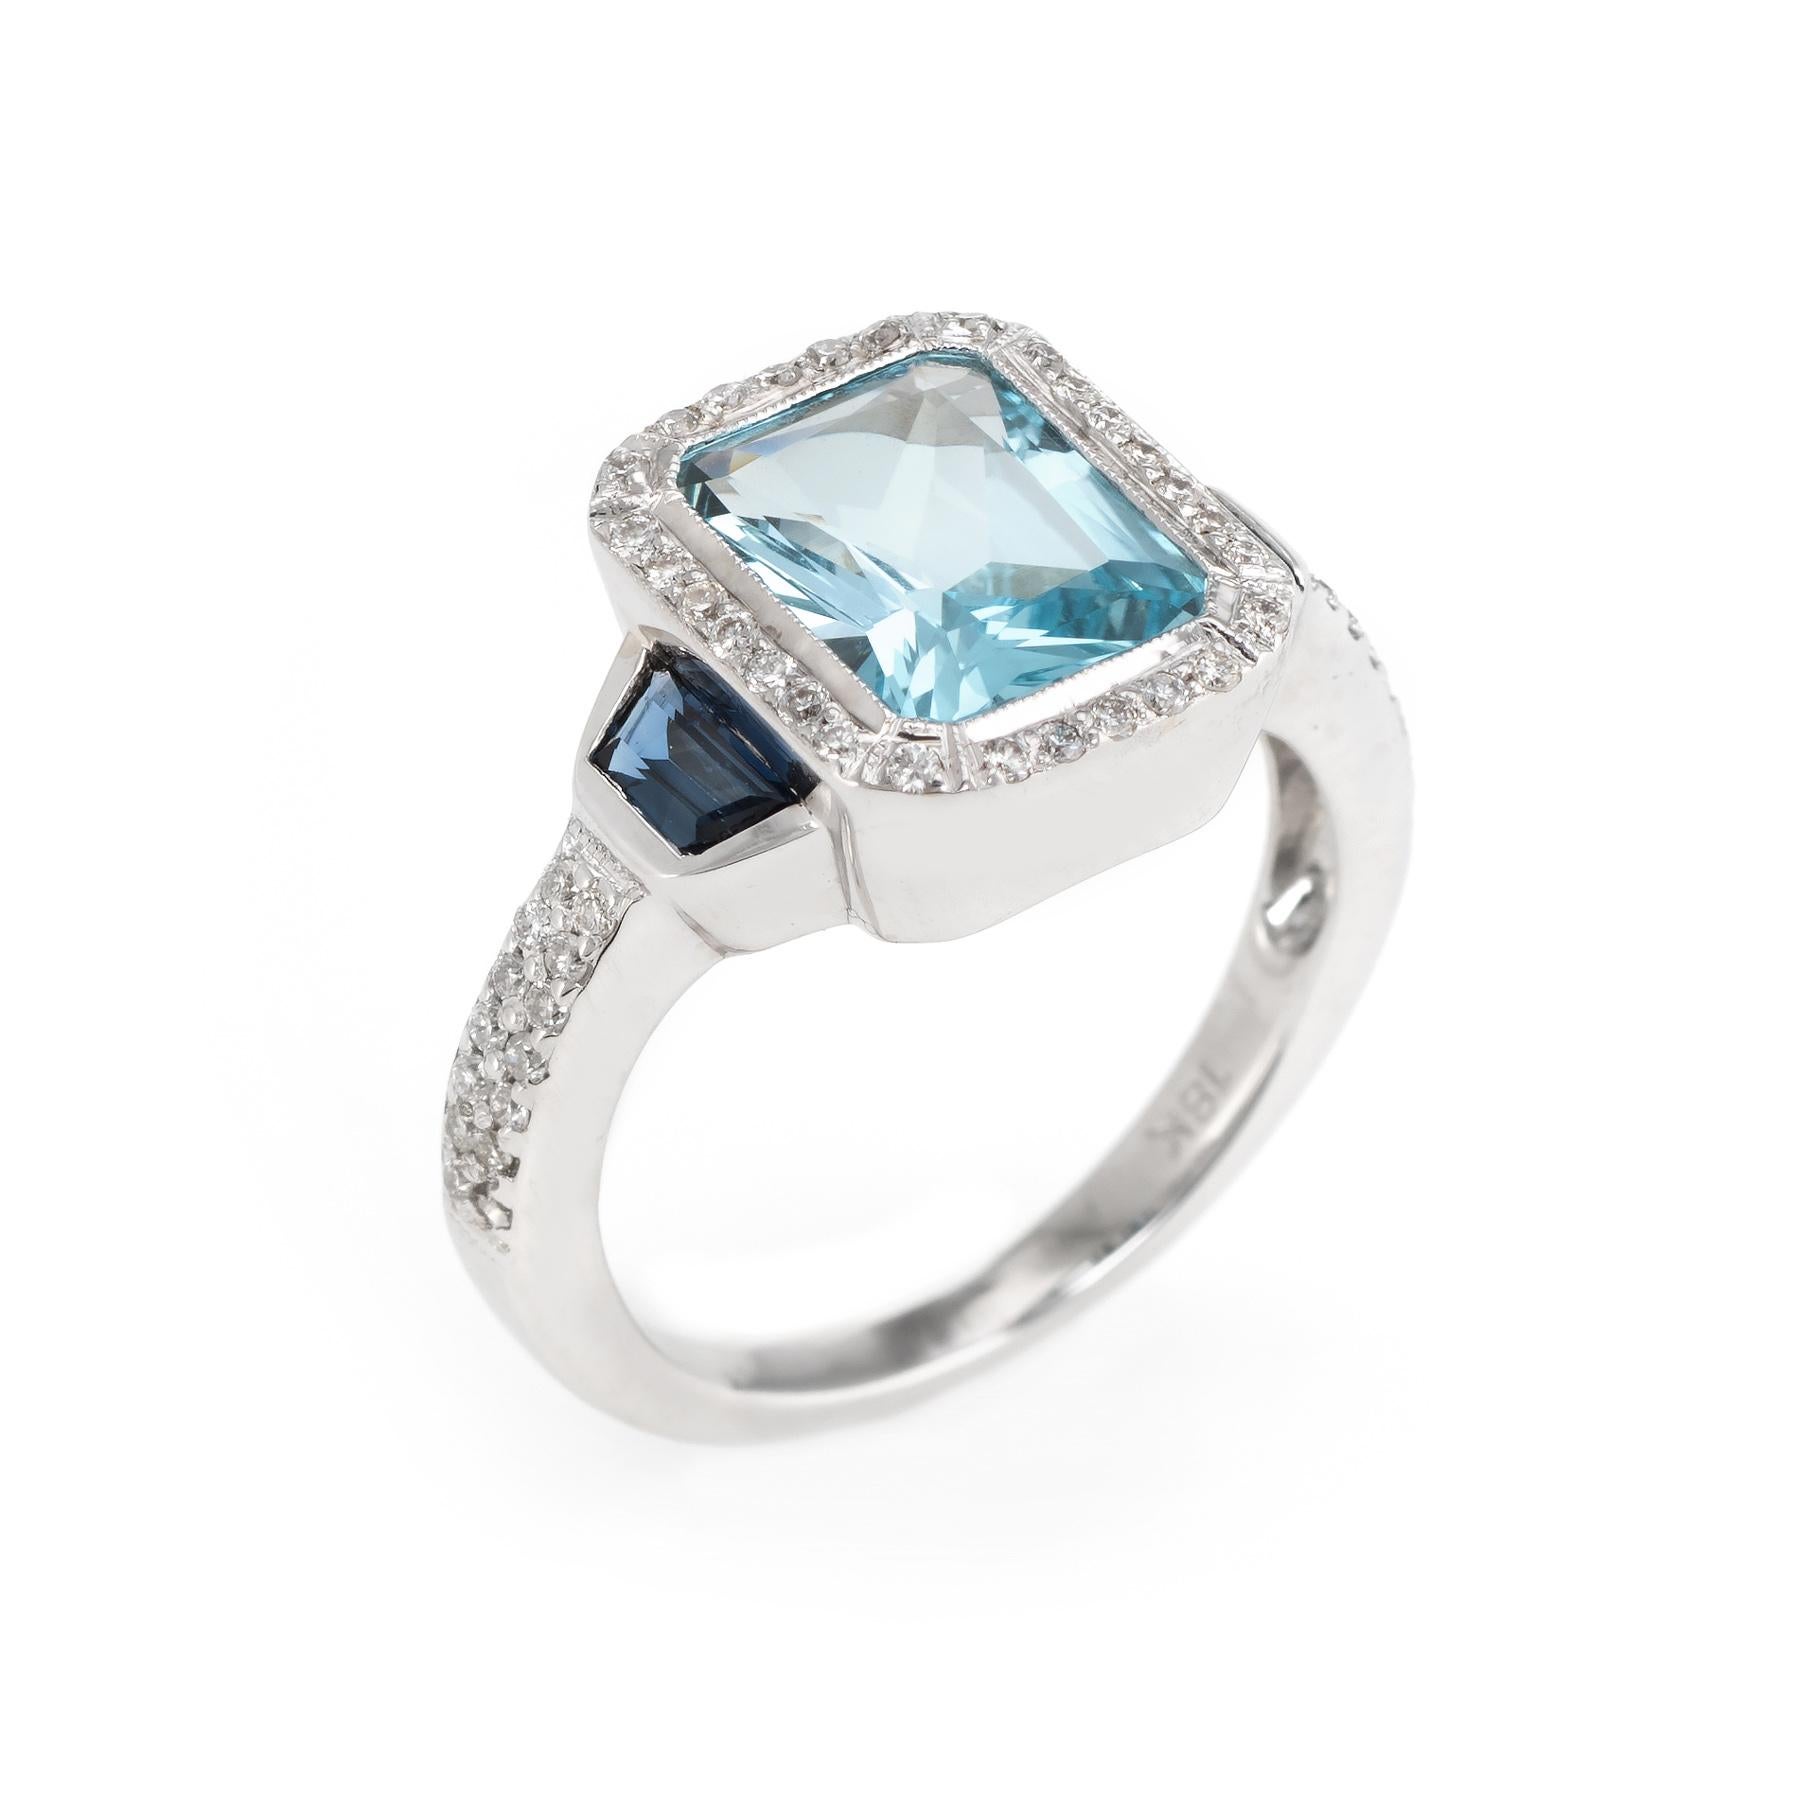 Finely detailed estate blue topaz, sapphire & diamond ring, crafted in 18 karat white gold. 

Centrally mounted cushion shaped blue topaz measures 9mm x 7mm (estimated at 3 carats), accented with two estimated 0.15 carat trapezoid shaped blue